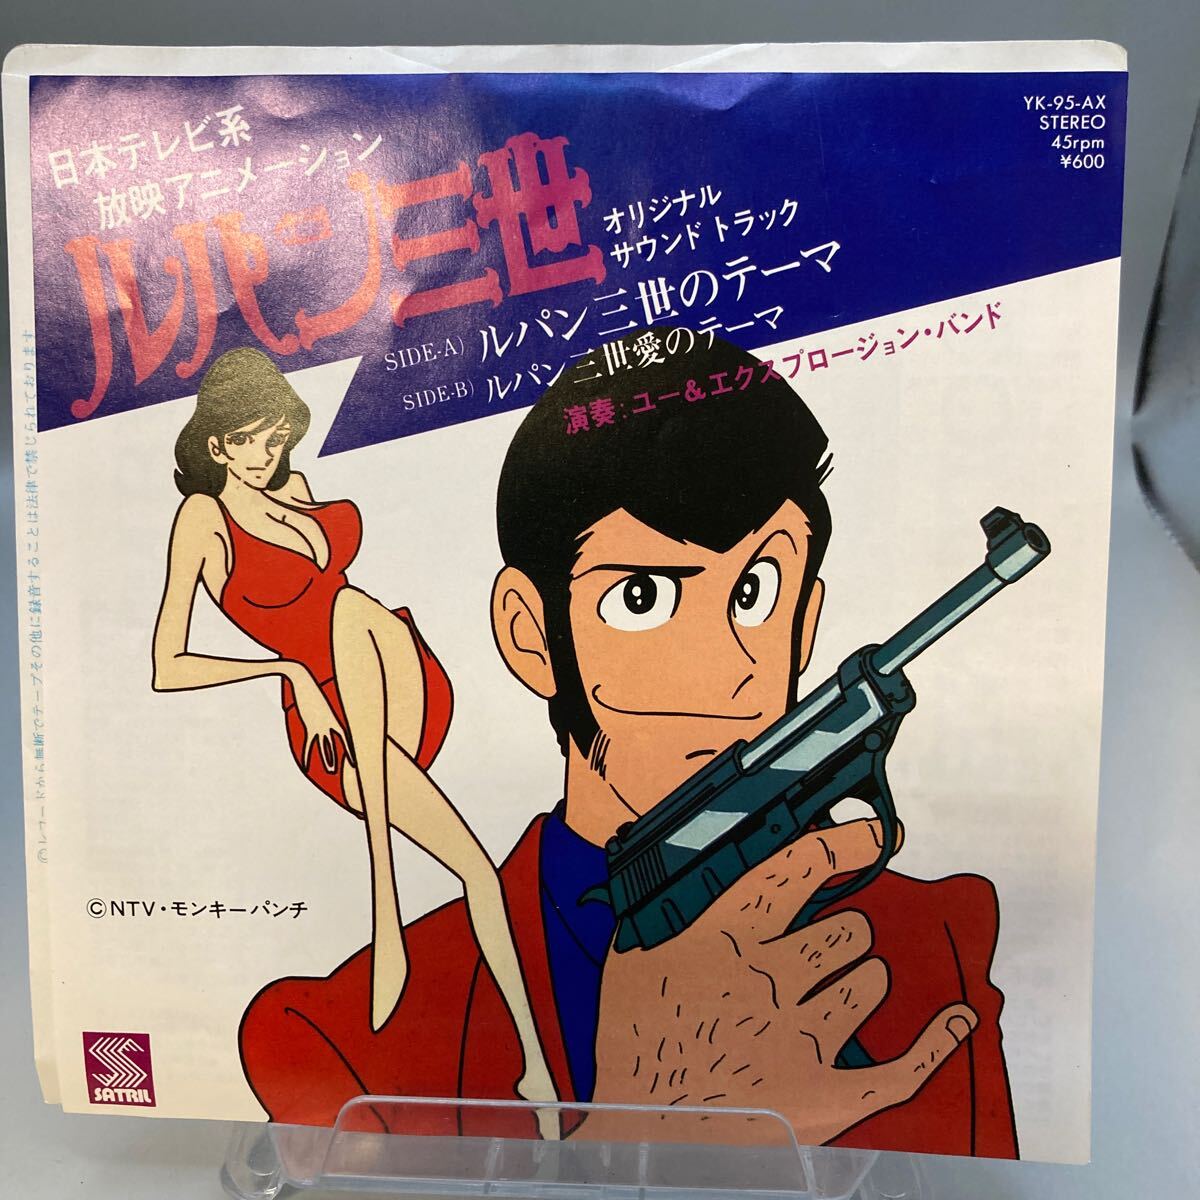  reproduction excellent EP record original soundtrack Lupin III. Thema / Lupin III love. Thema You &eksp low John * band anime 